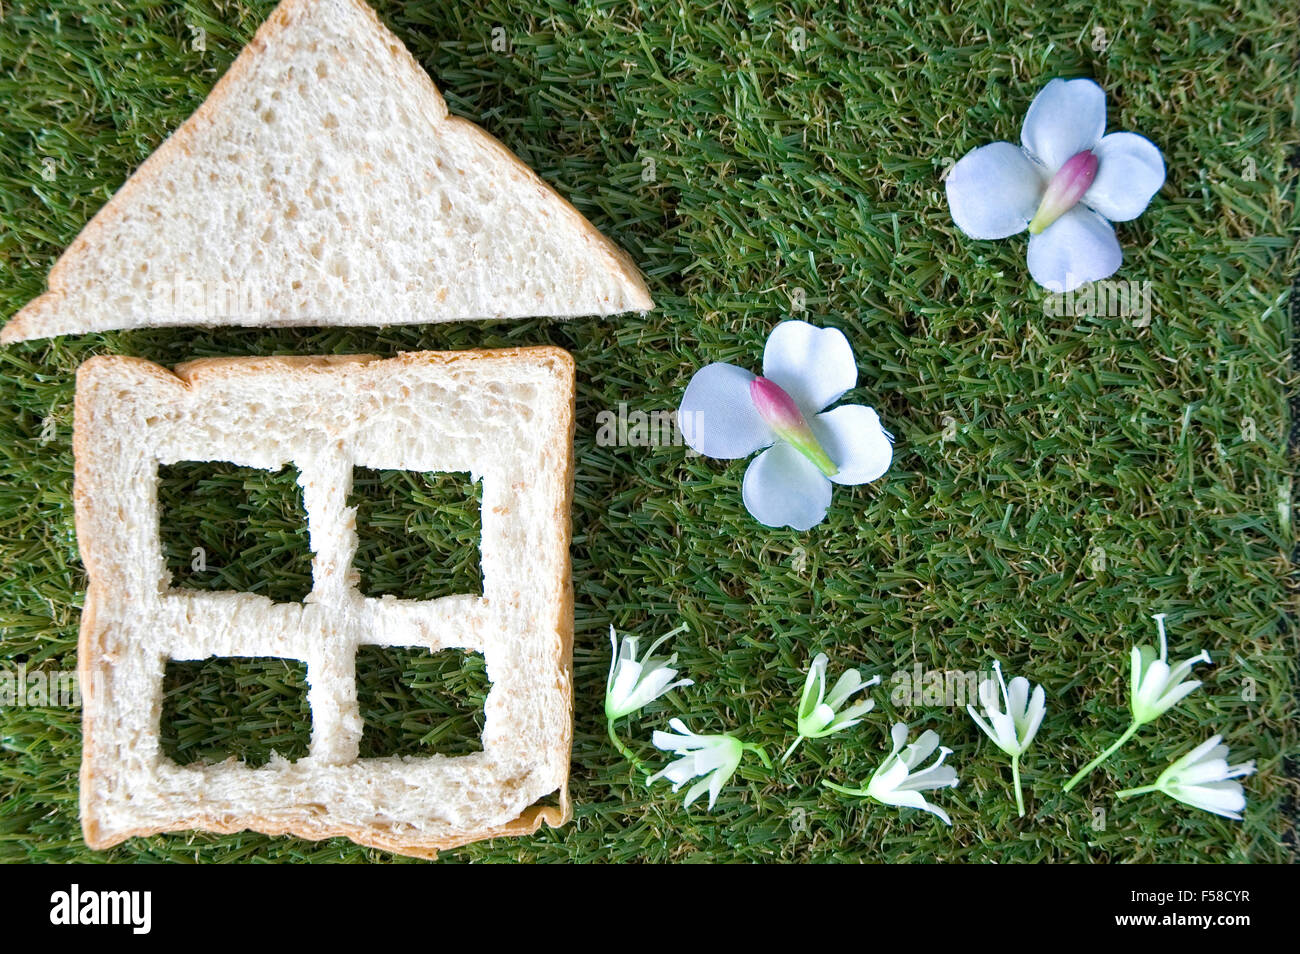 bread cut in house shape with garden flowers Stock Photo